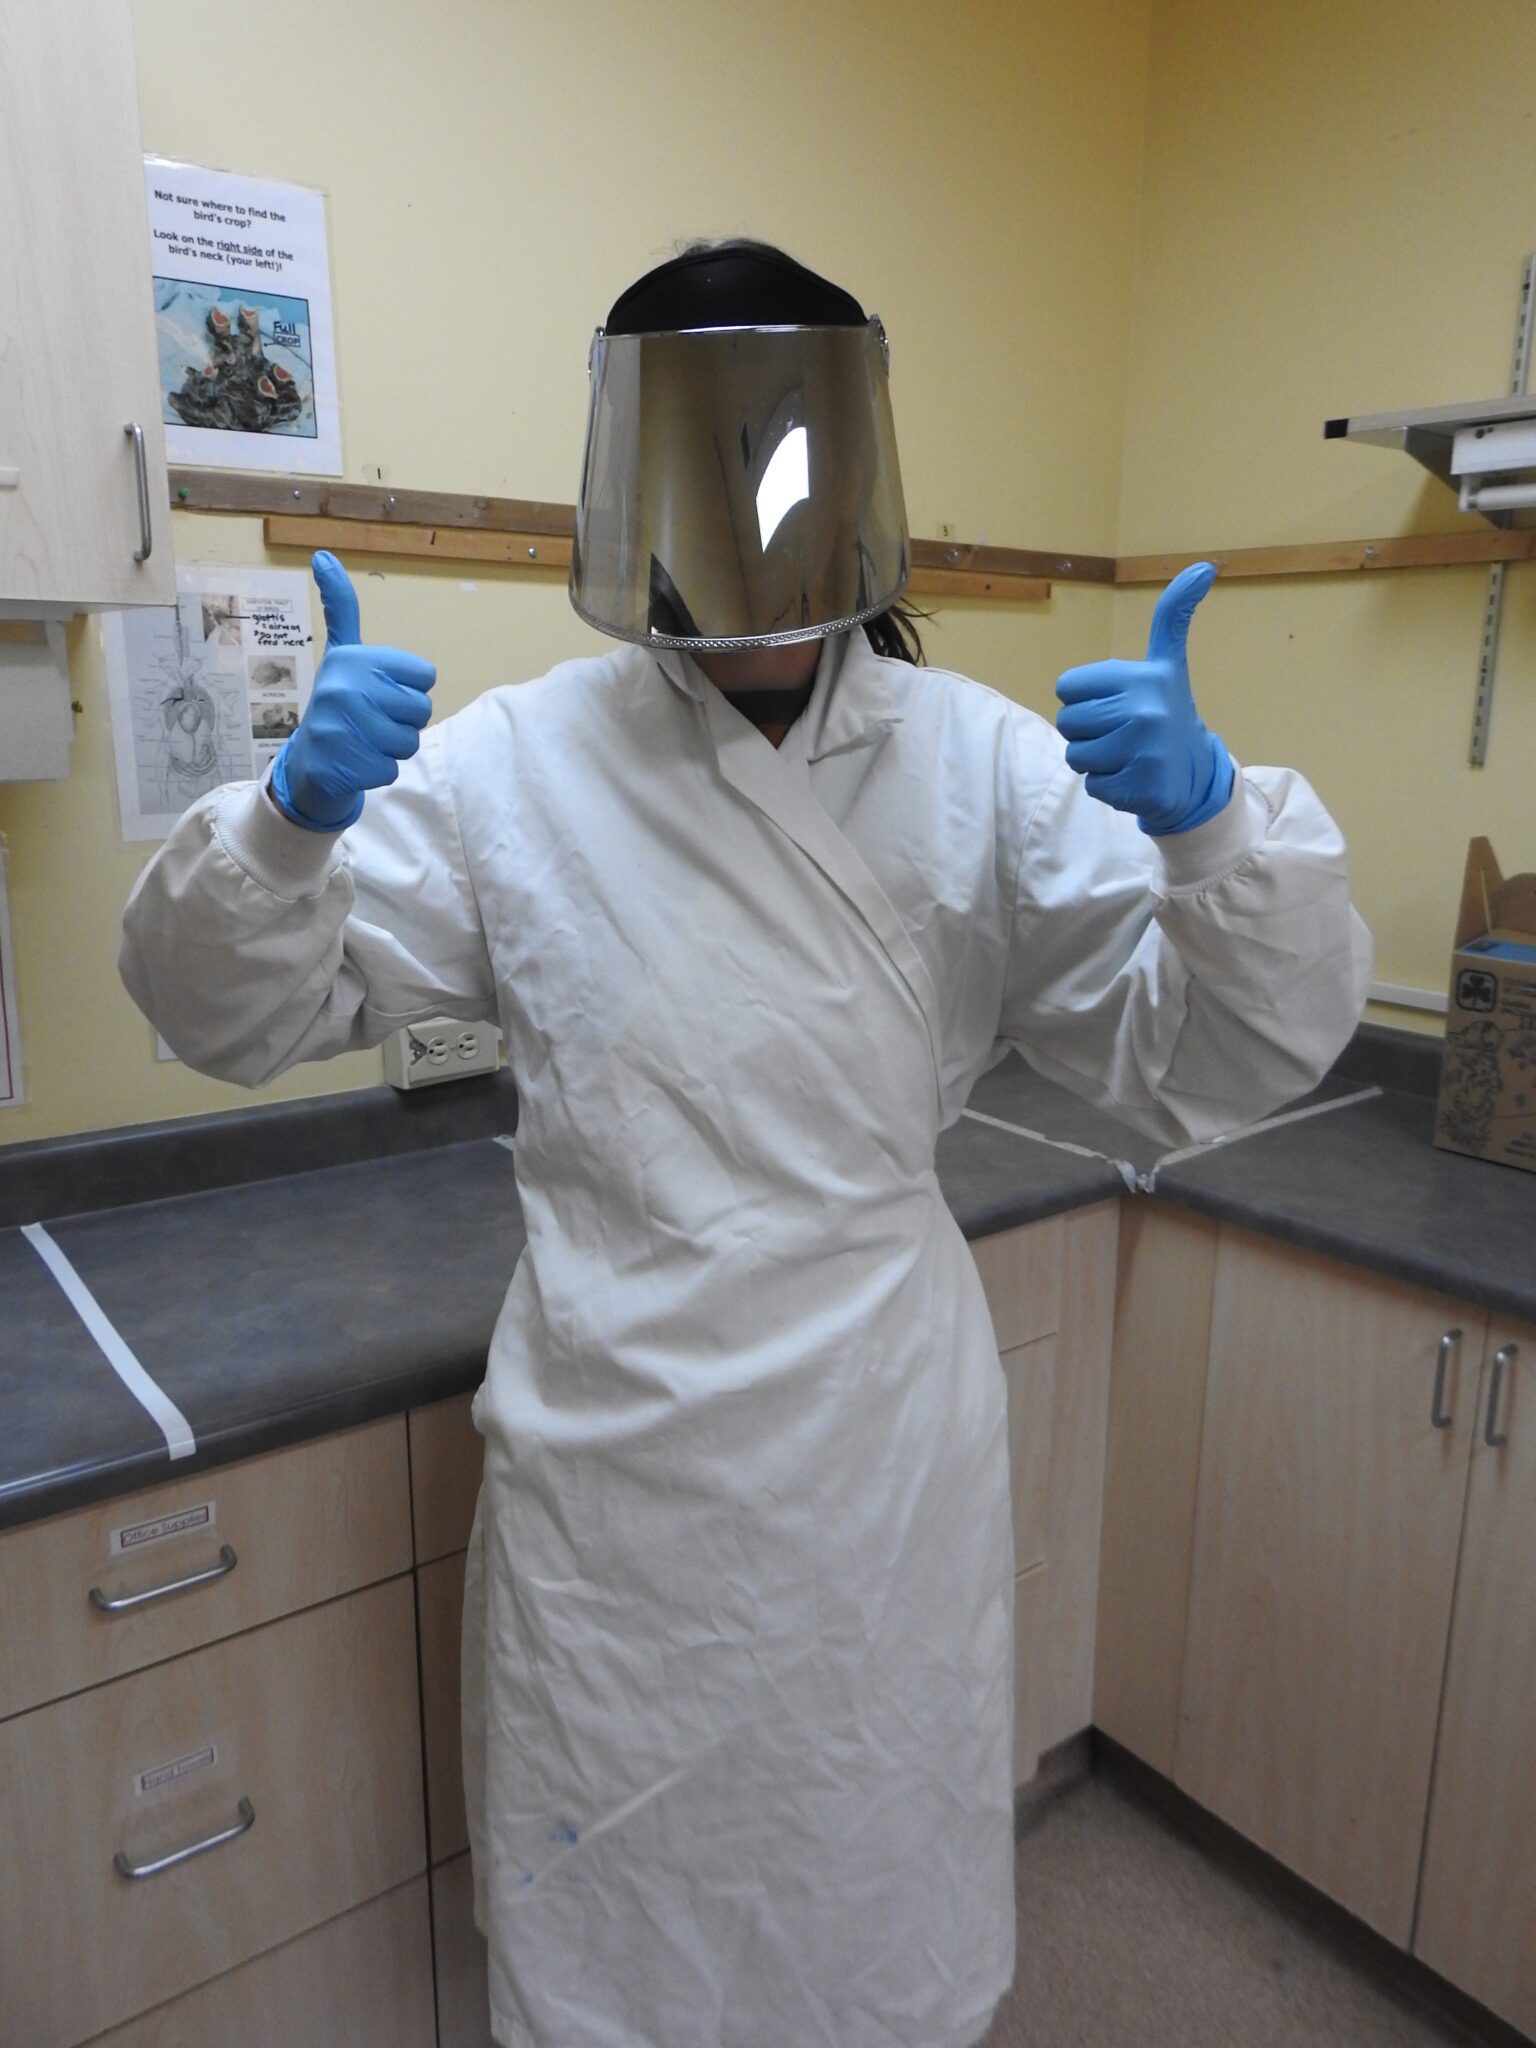 Wild ARC staff wearing gown, gloves and mask to prevent imprinting